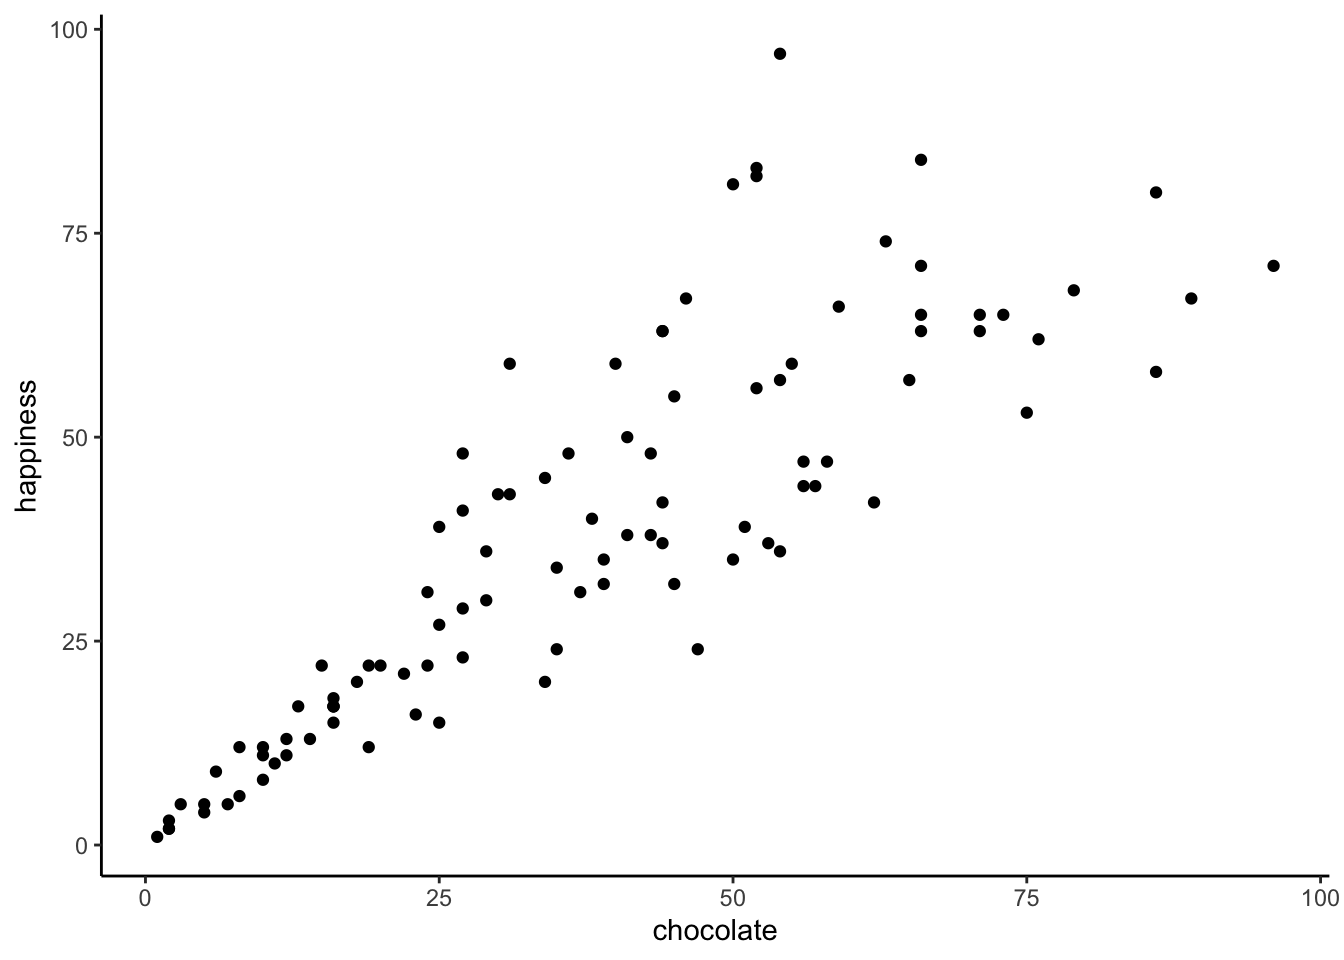 Imaginary data showing a positive correlation between amount of chocolate and amount happiness